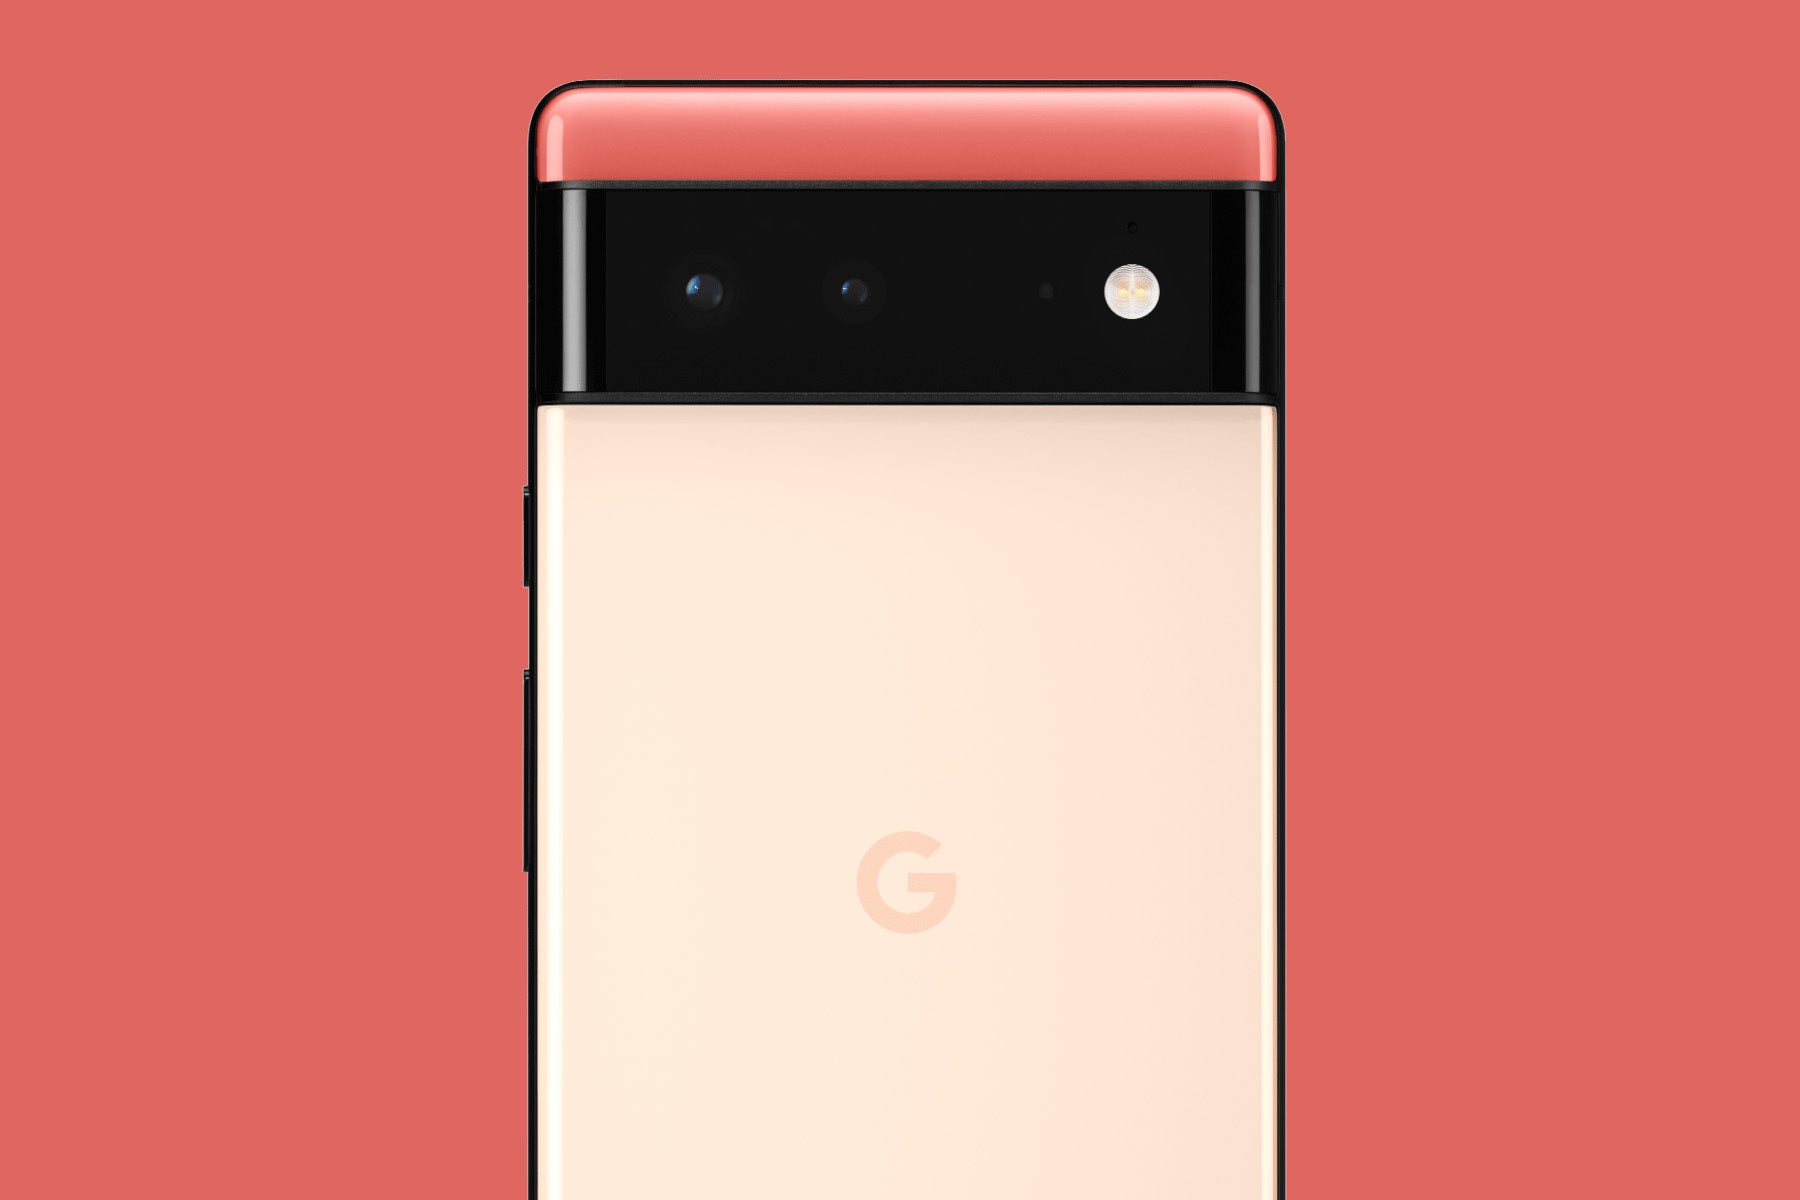 Pixel 6 and Pixel 6 Pro colors: all the official colors